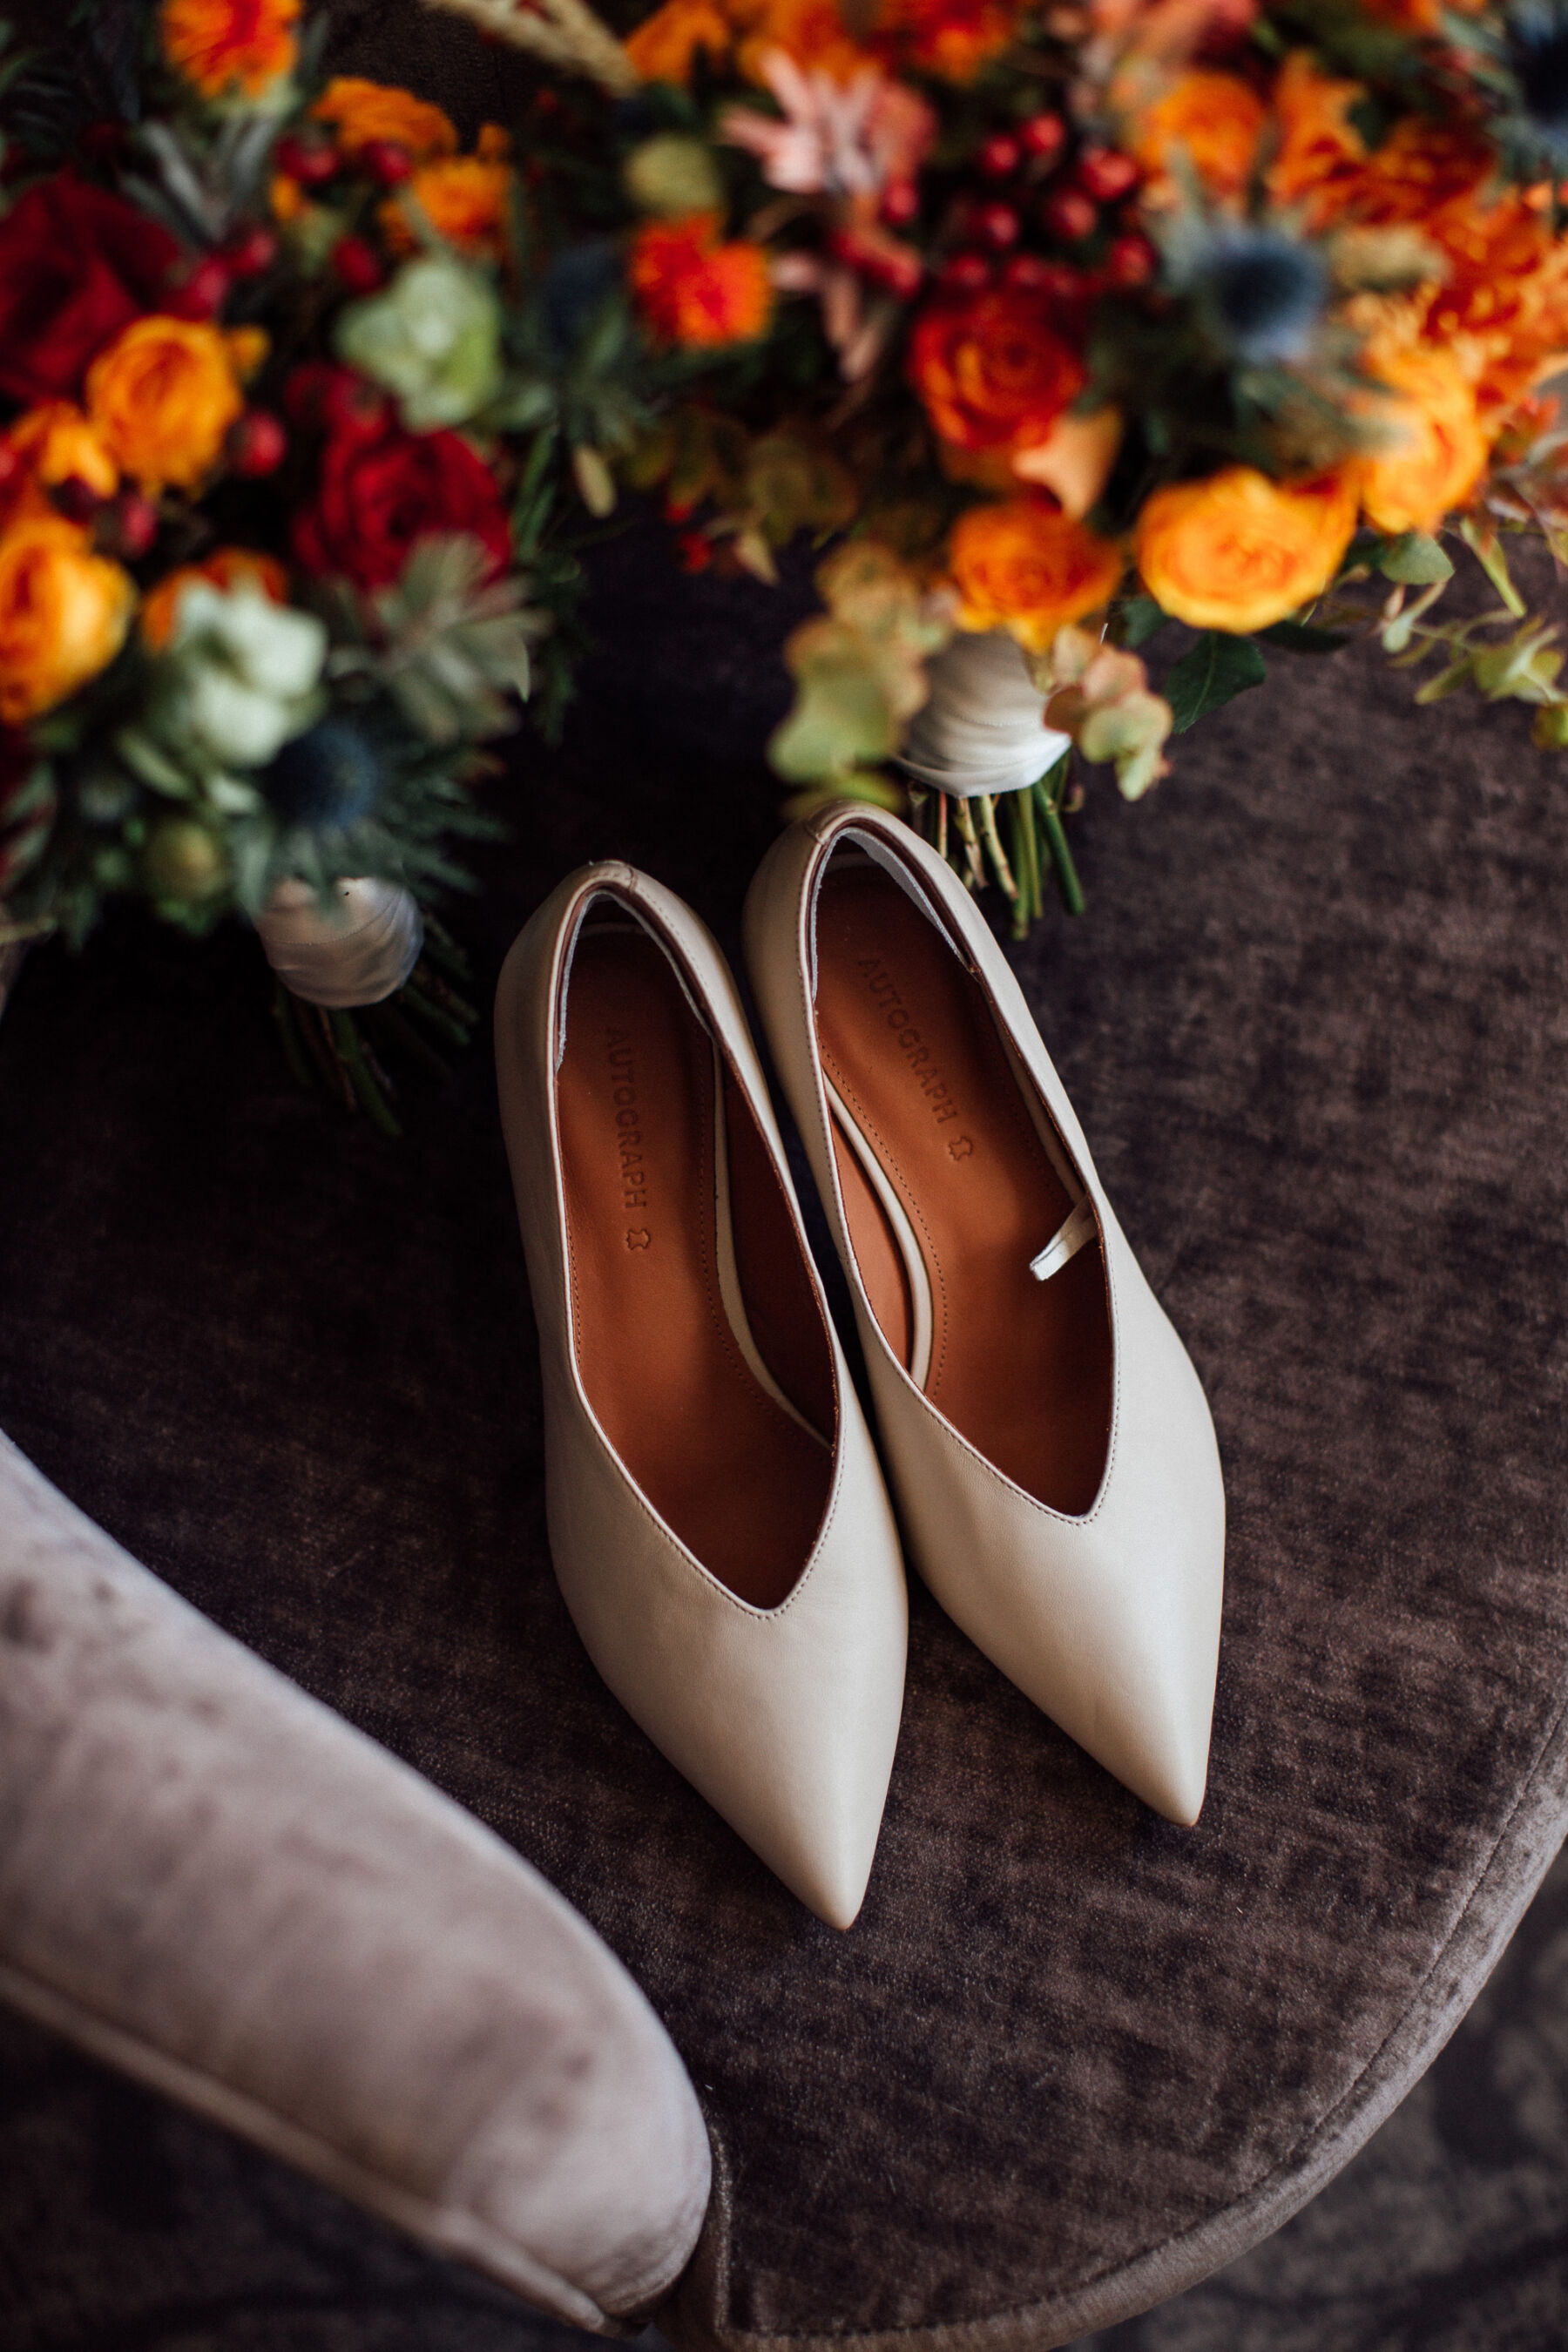 Cream pointed court shoes from M&S.